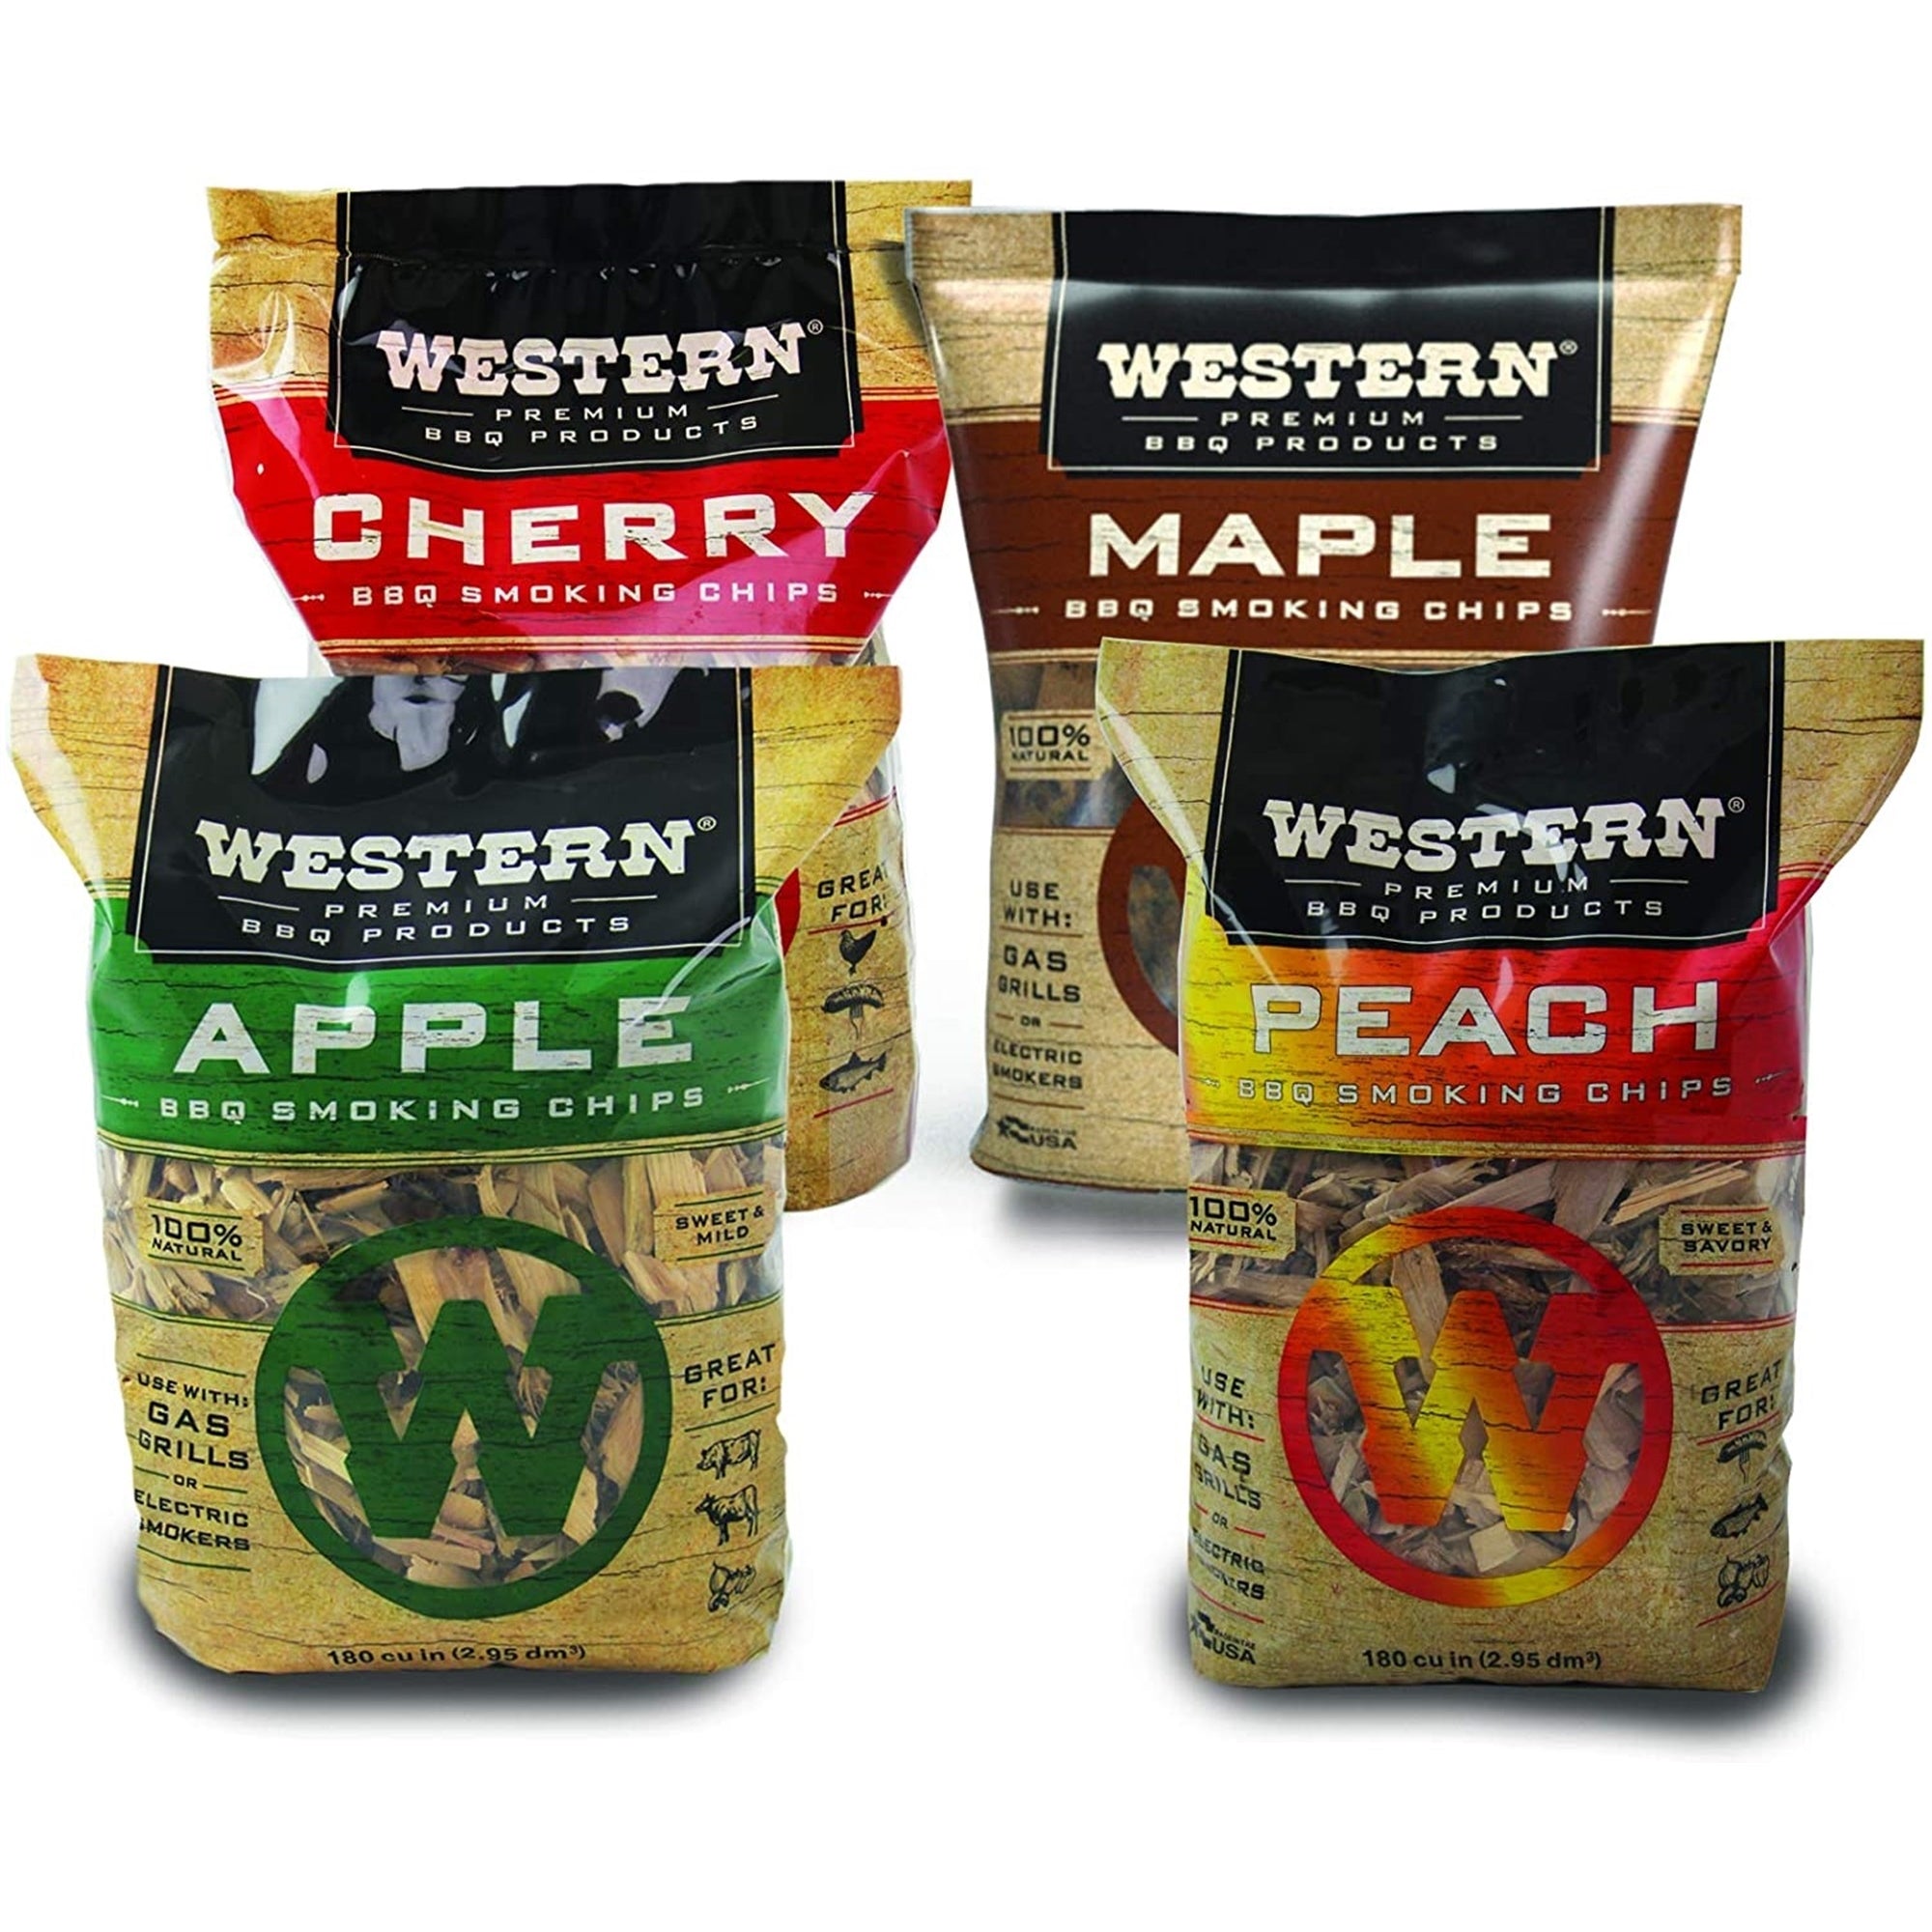 WESTERN BBQ Smoking Chips, 4 pack